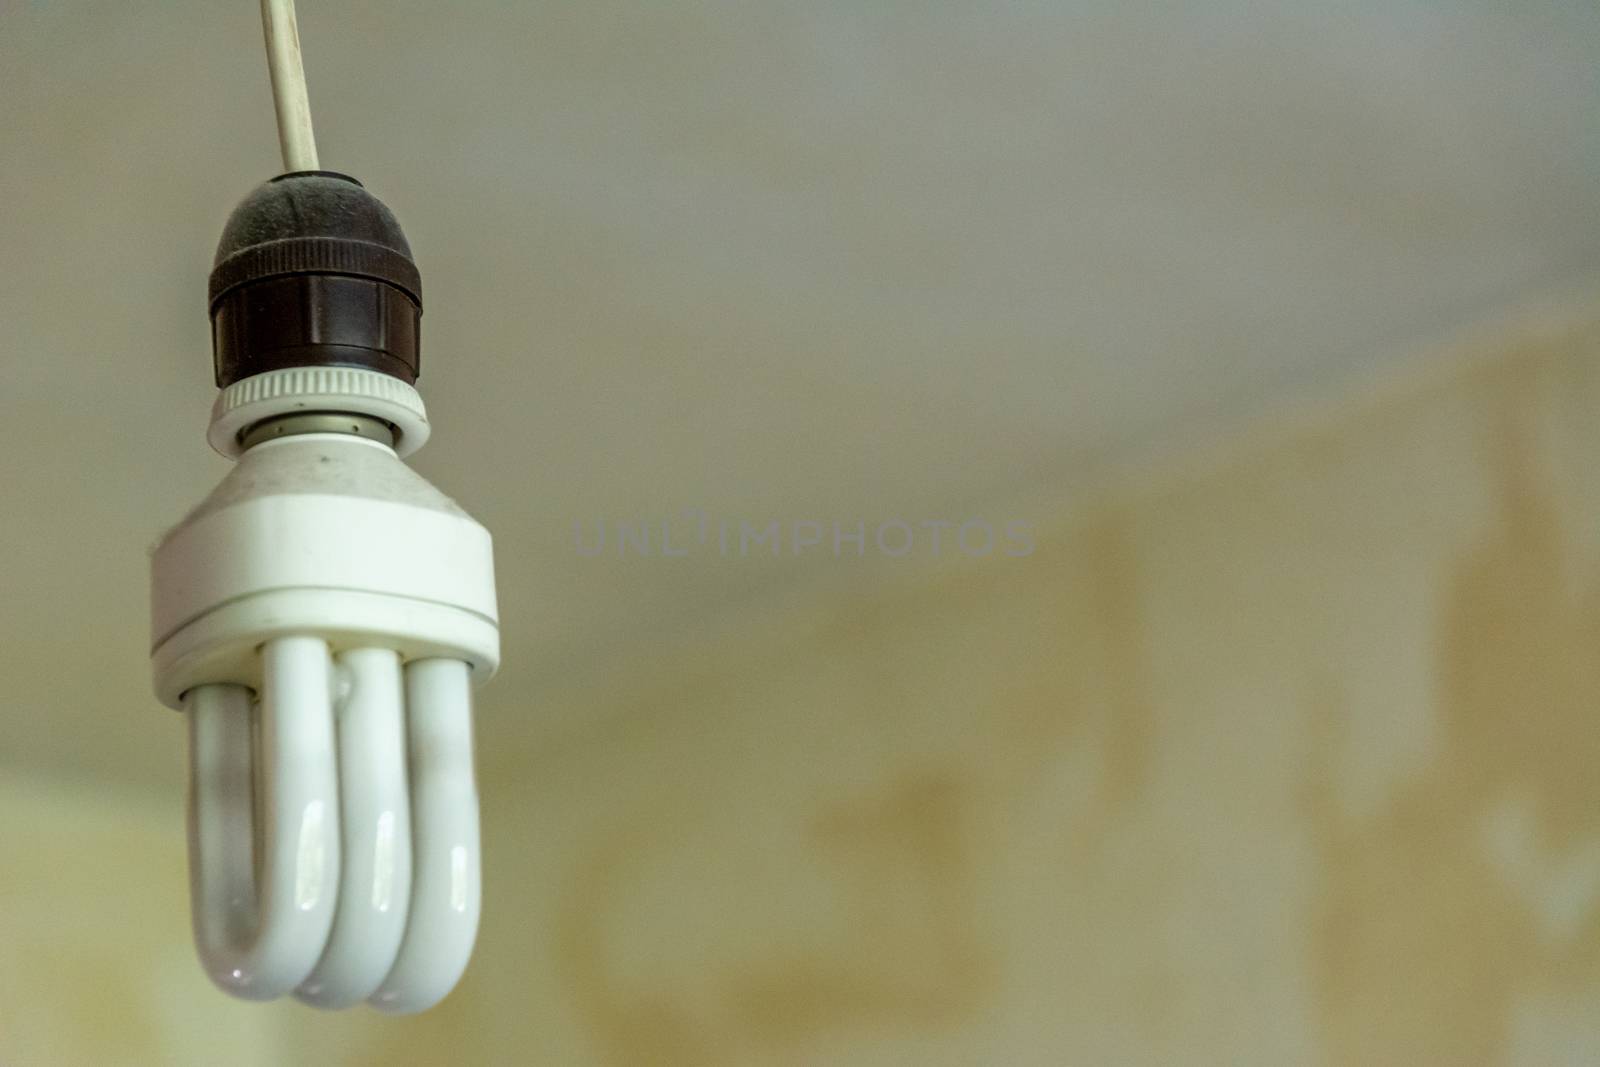 Electrical CFL lamp on barebone socket in old an grunge style room indicating poverty and difficulties paying energy bills